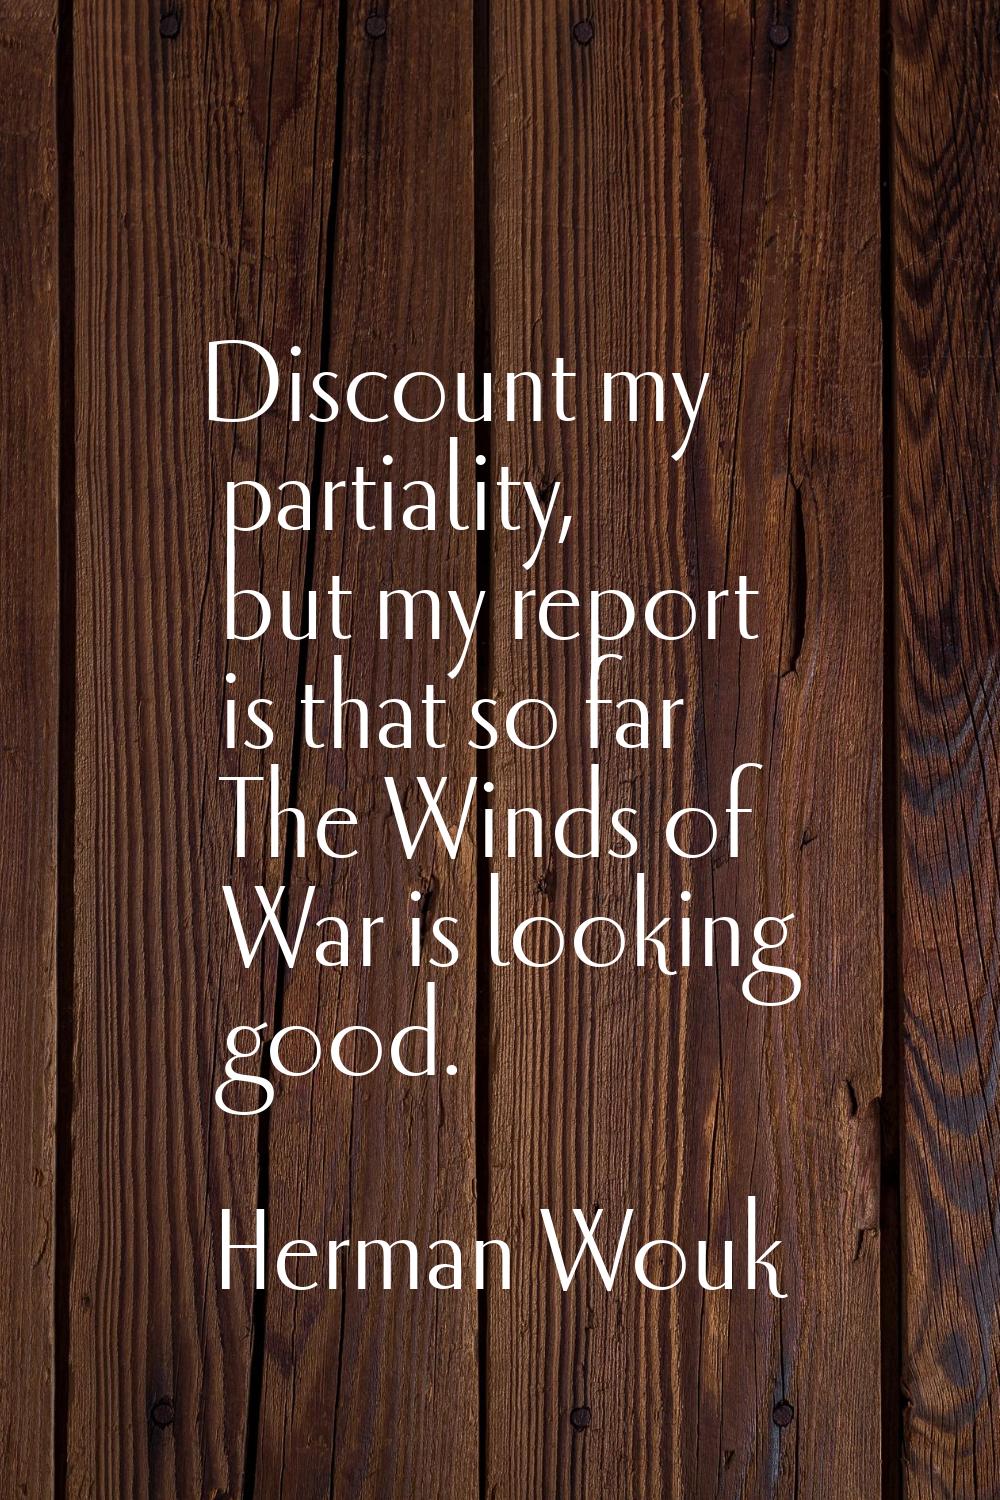 Discount my partiality, but my report is that so far The Winds of War is looking good.